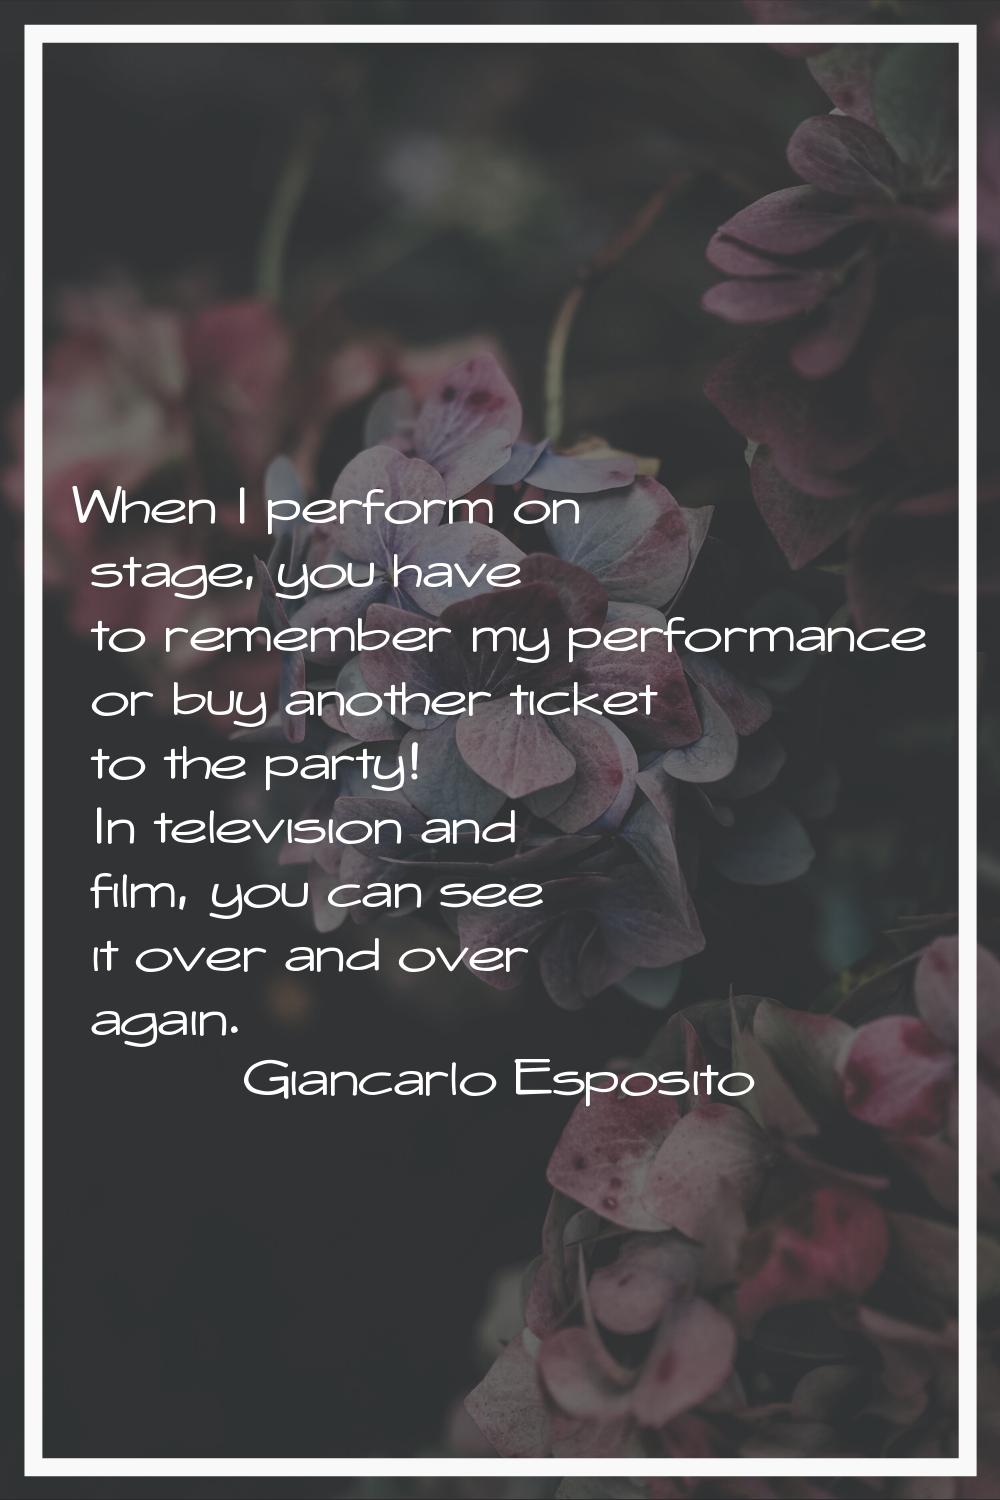 When I perform on stage, you have to remember my performance or buy another ticket to the party! In